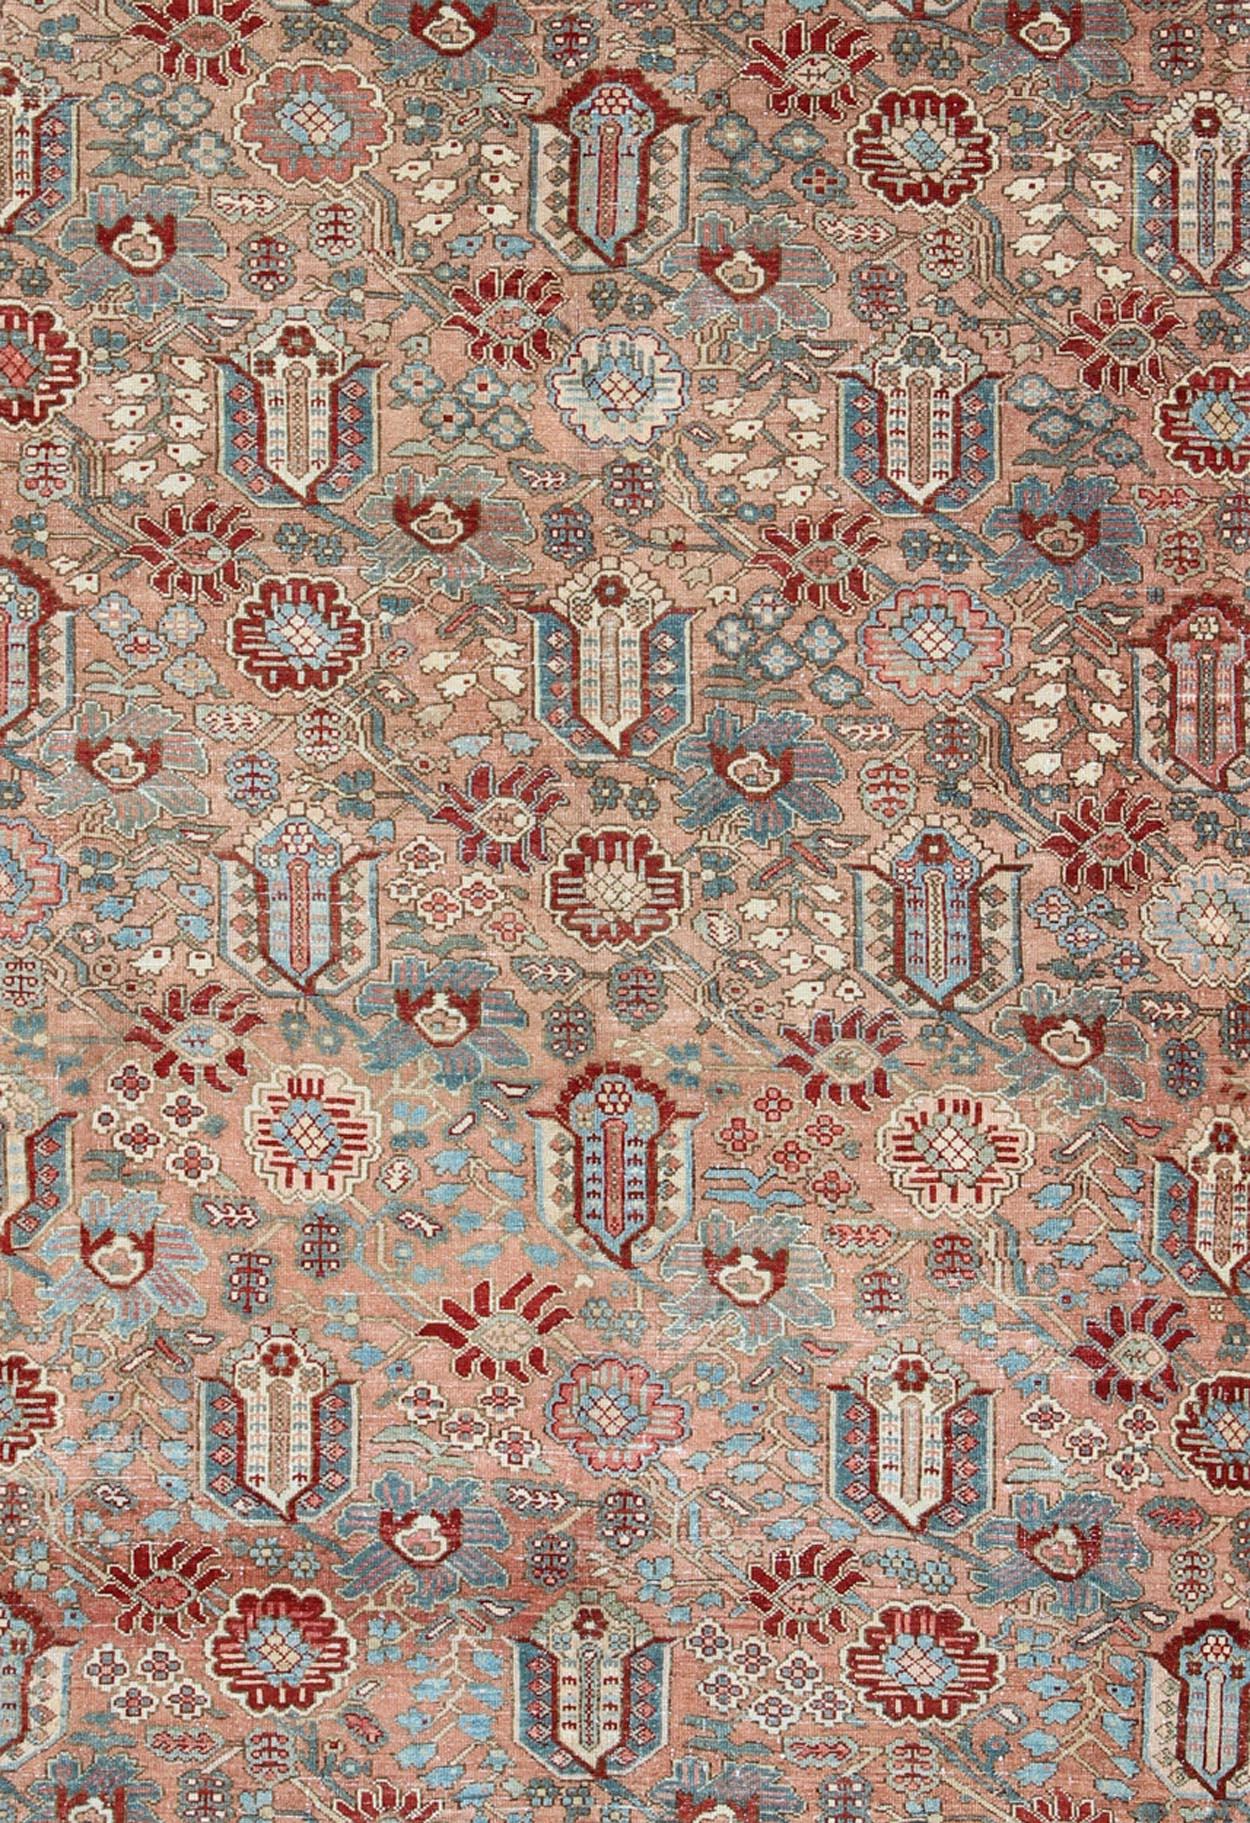 Tribal Geometric-Floral Antique Persian Bakhtiari Rug with All-Over Design in Salmon For Sale